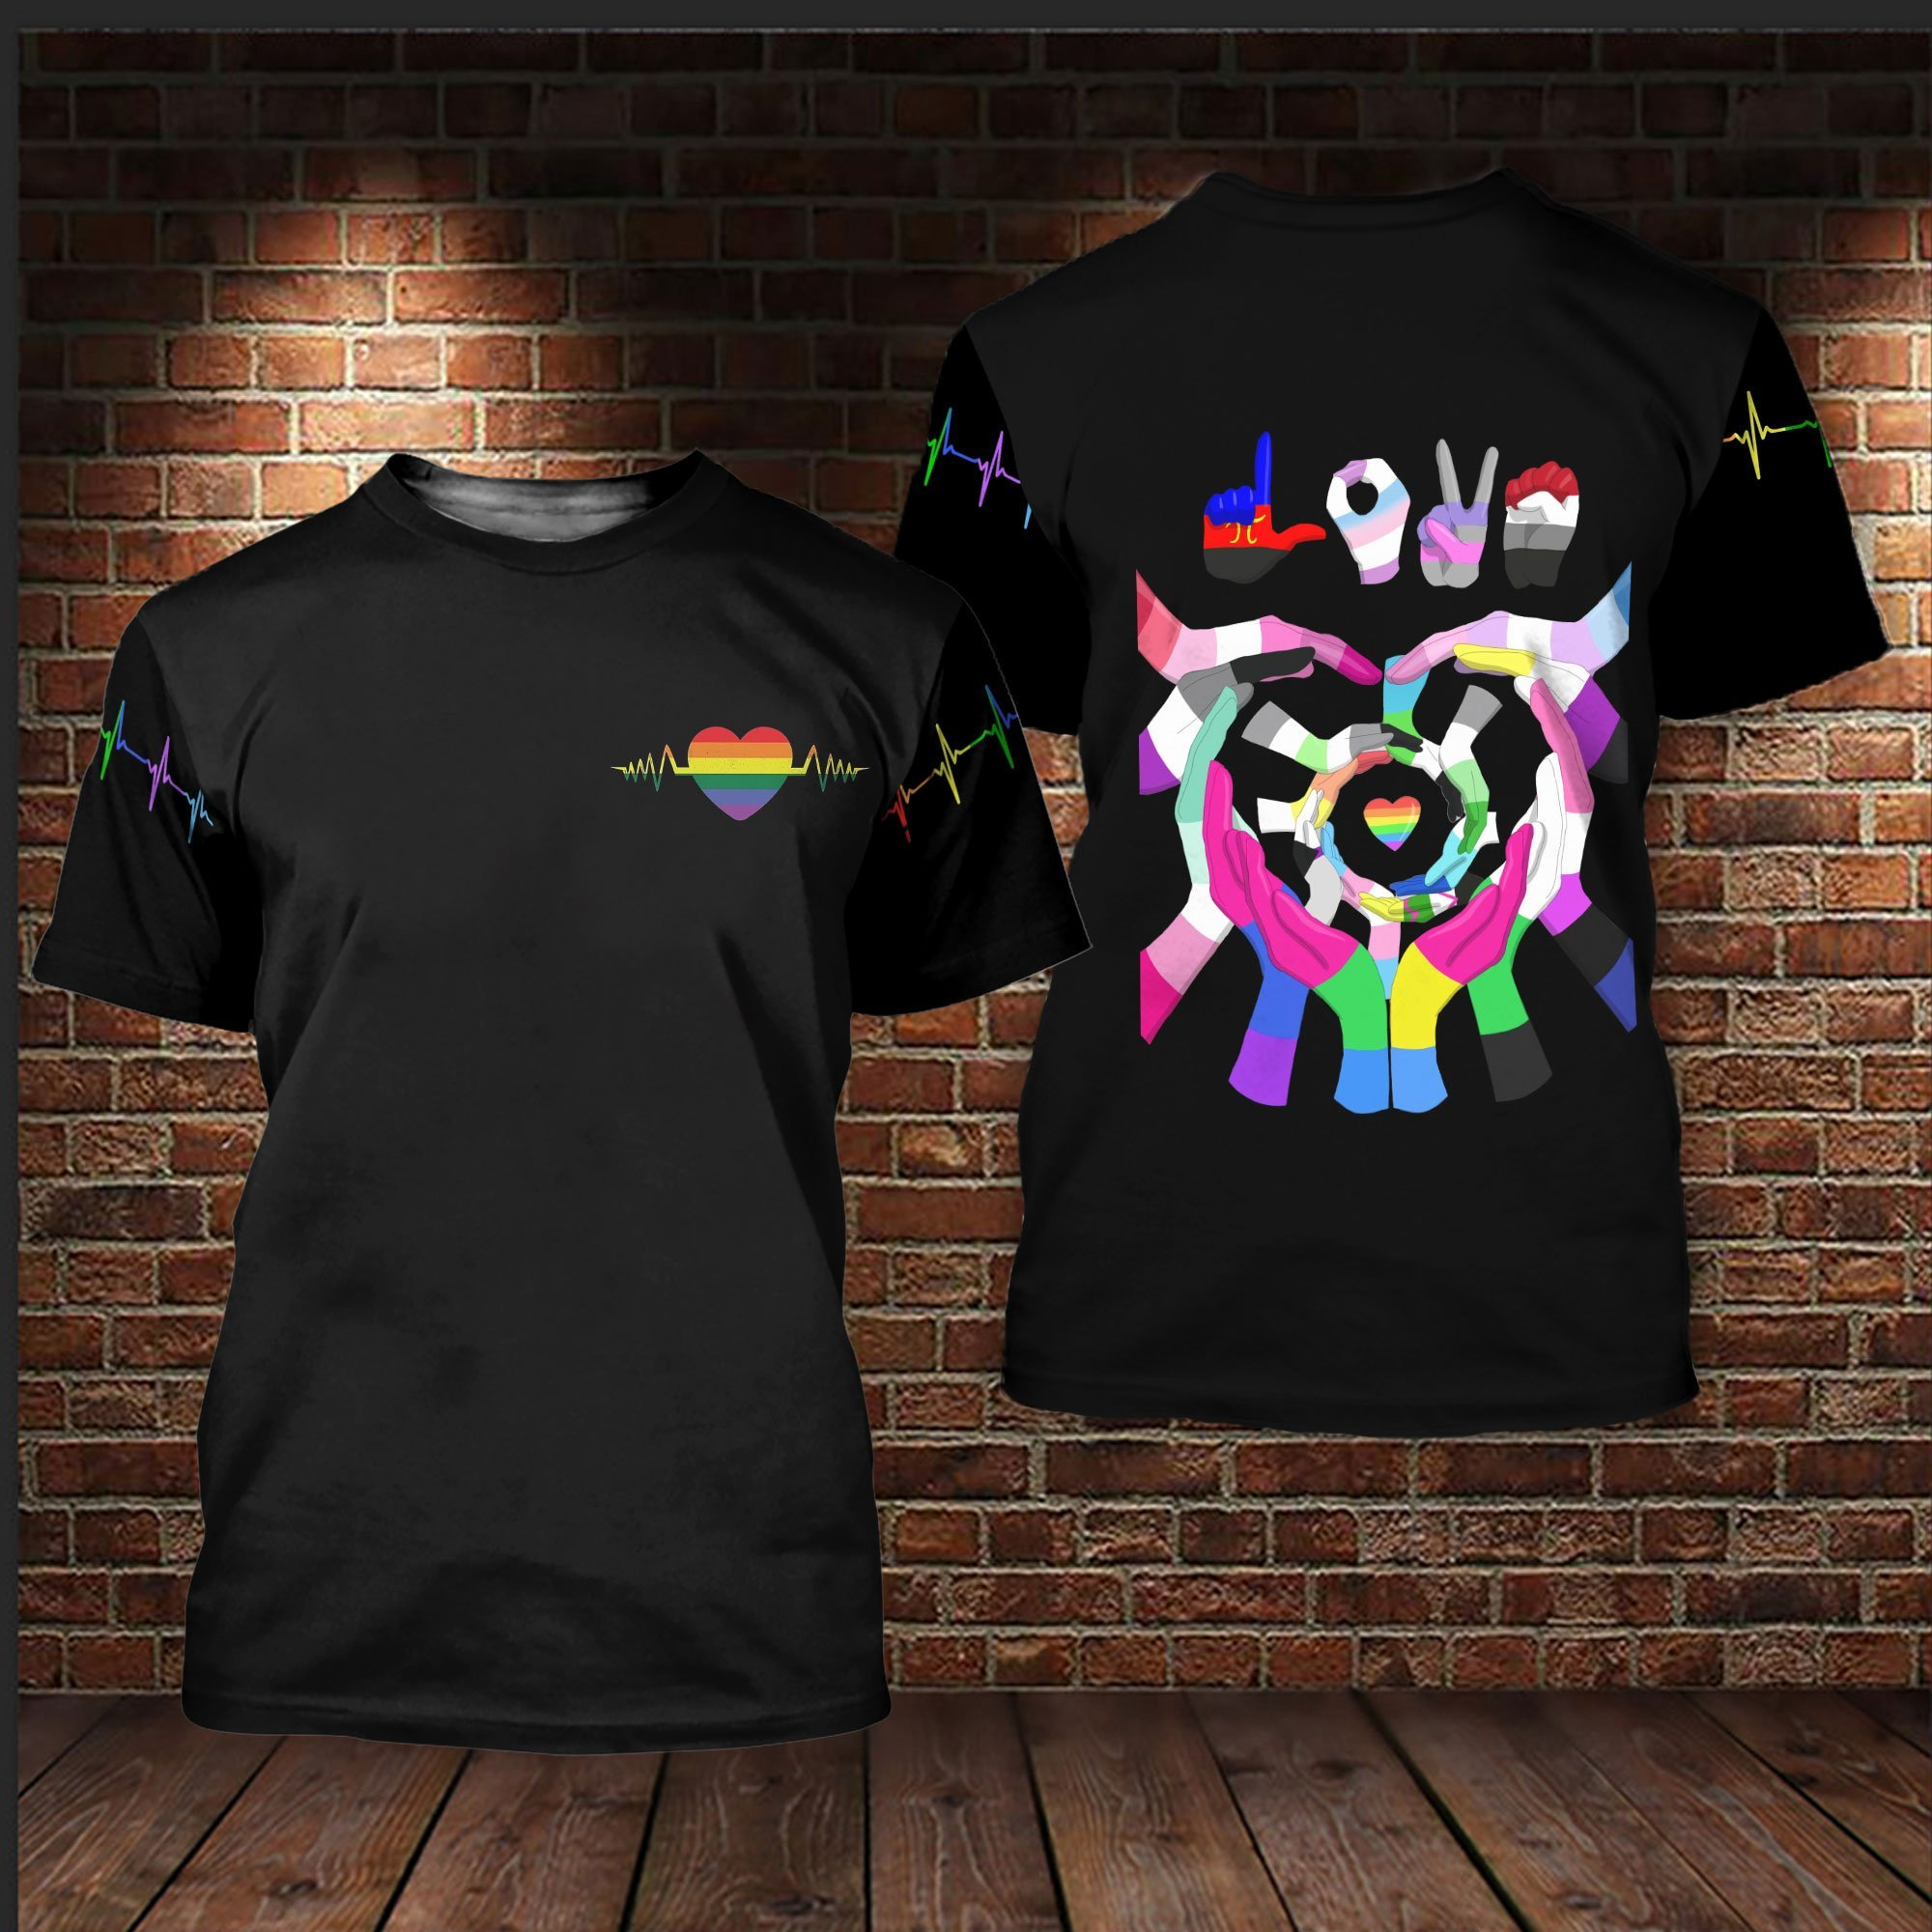 Pansexual Pride Shirt/ LGBT Love Always Wins/ Shirts For LGBT Pride Month/ Bisexual Shirt